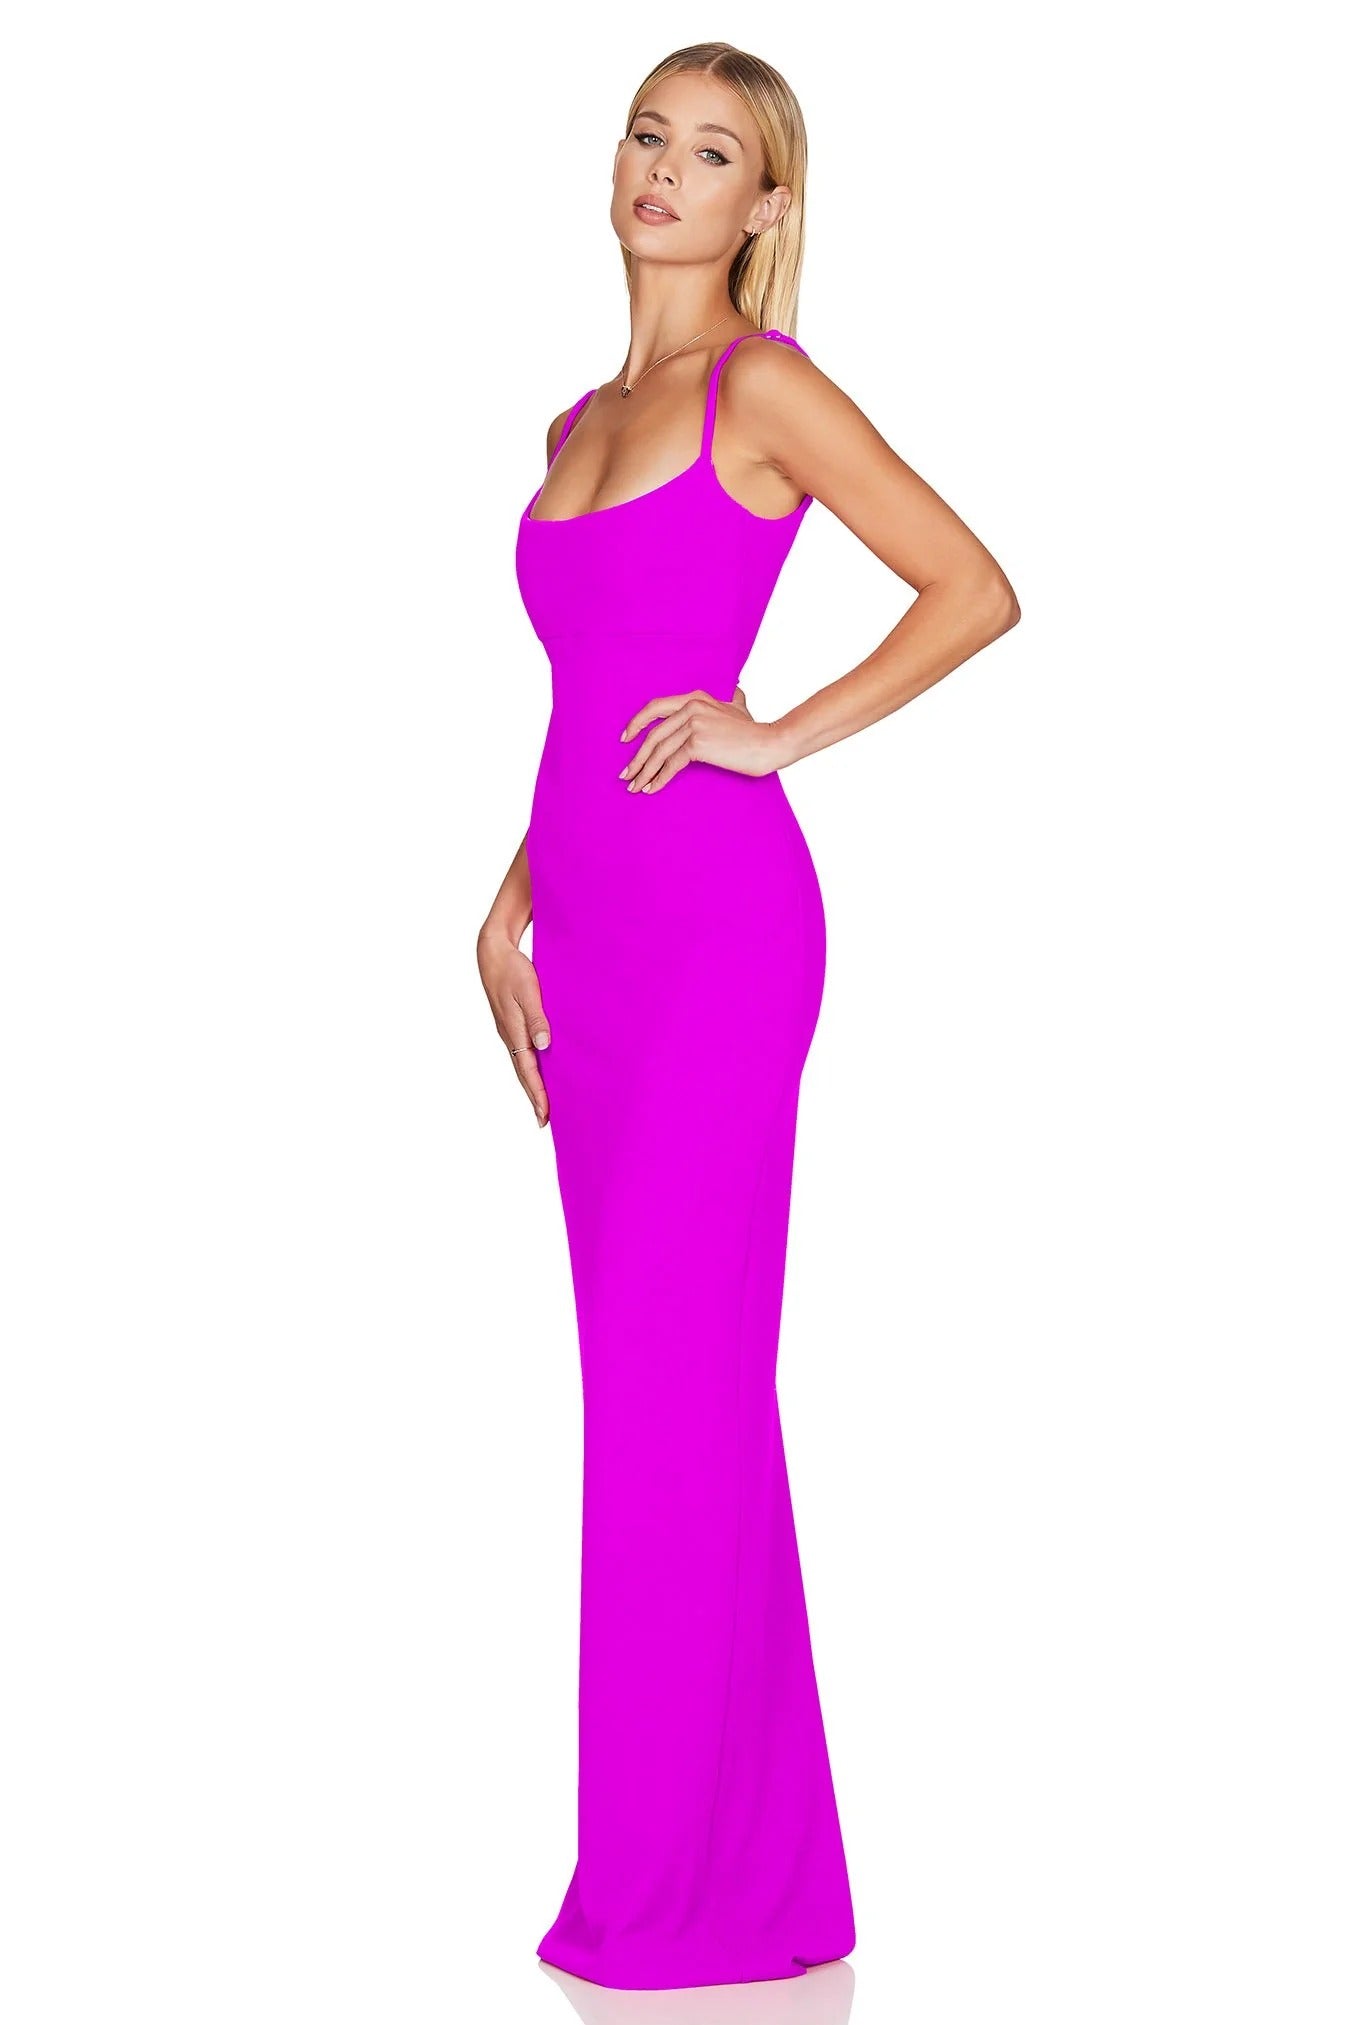 Nookie Bailey Gown - Electric Pink - SHOPJAUS - JAUS